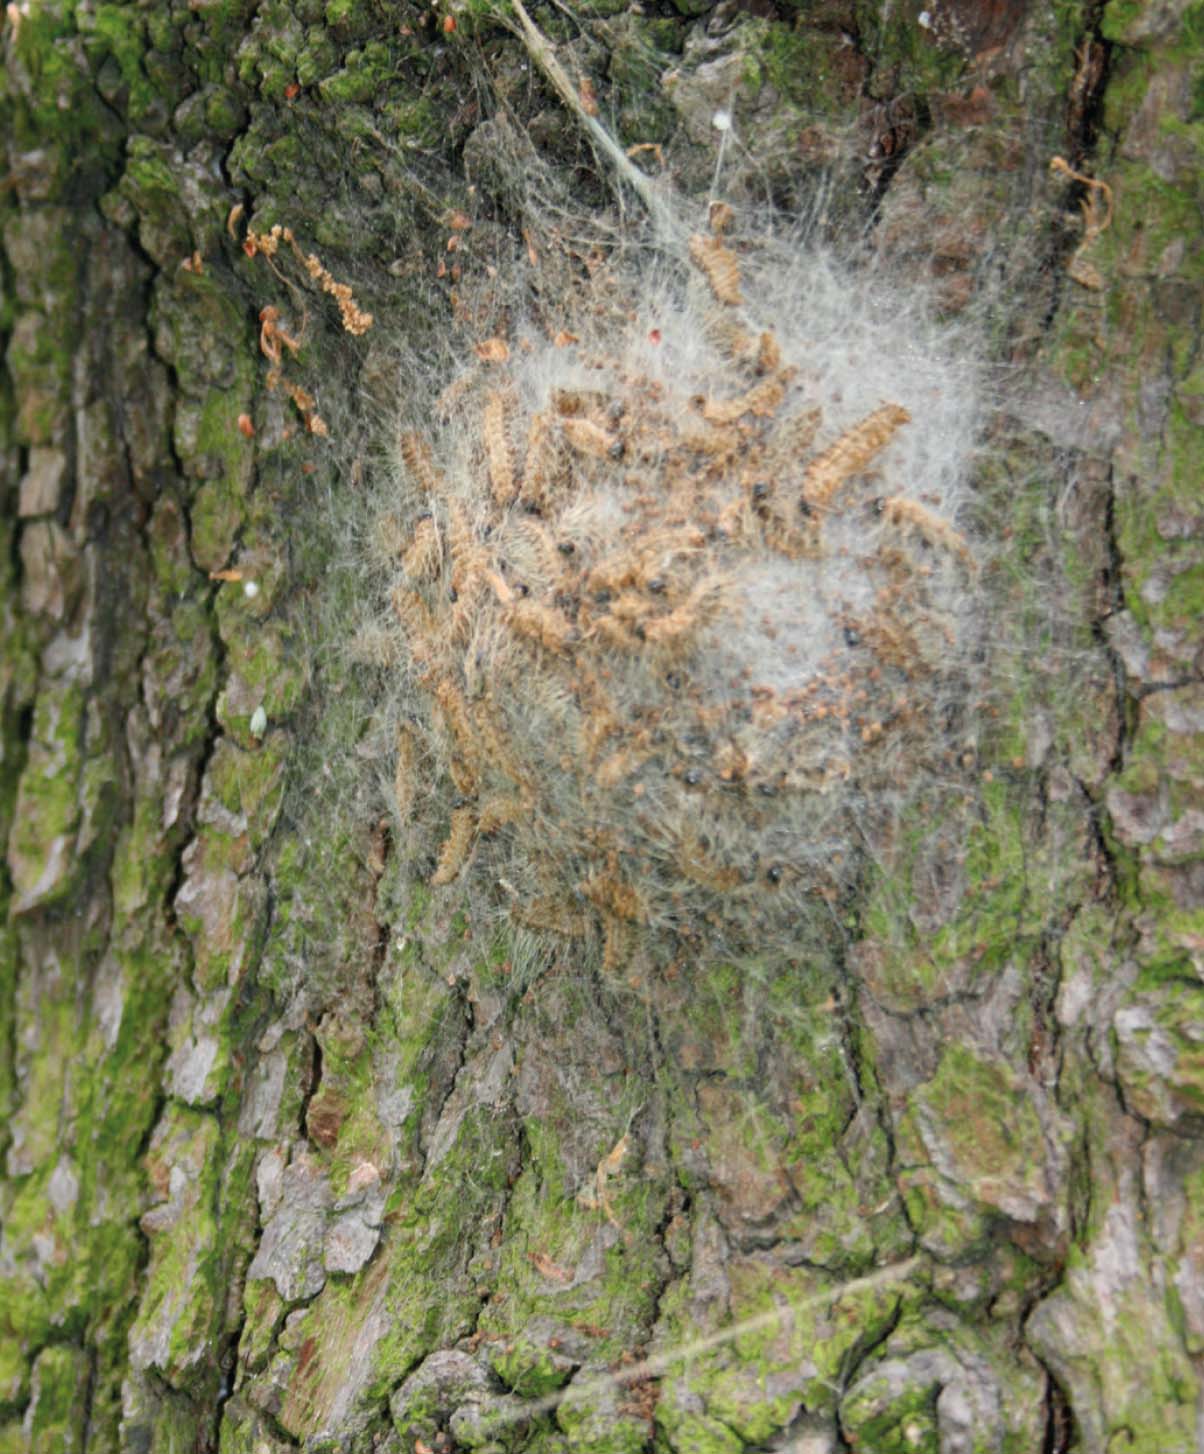 OPM. Late instar caterpillars moving in a nest